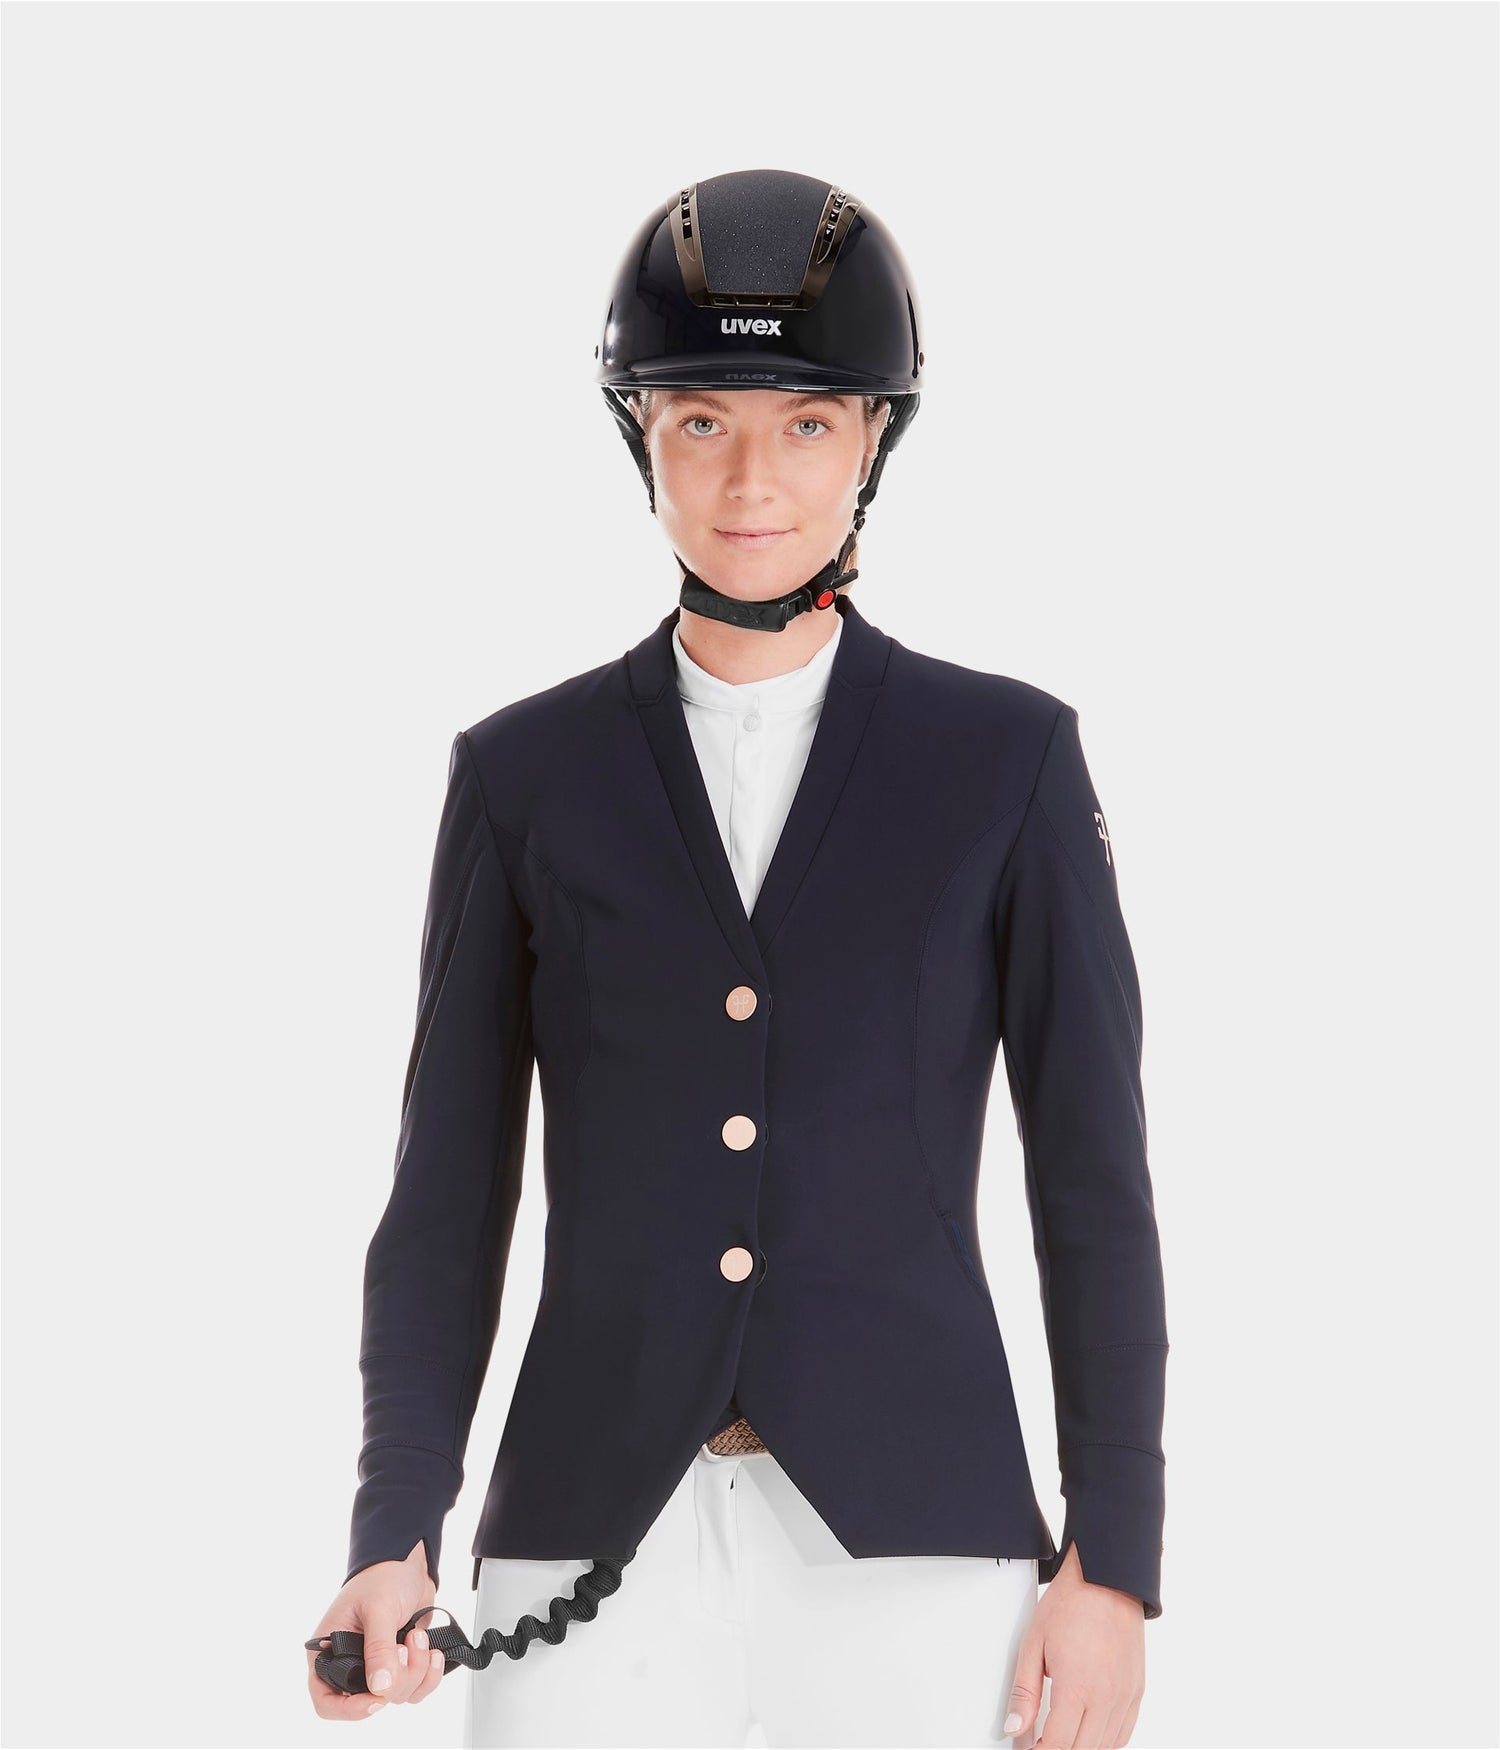 equestrian competition jacket